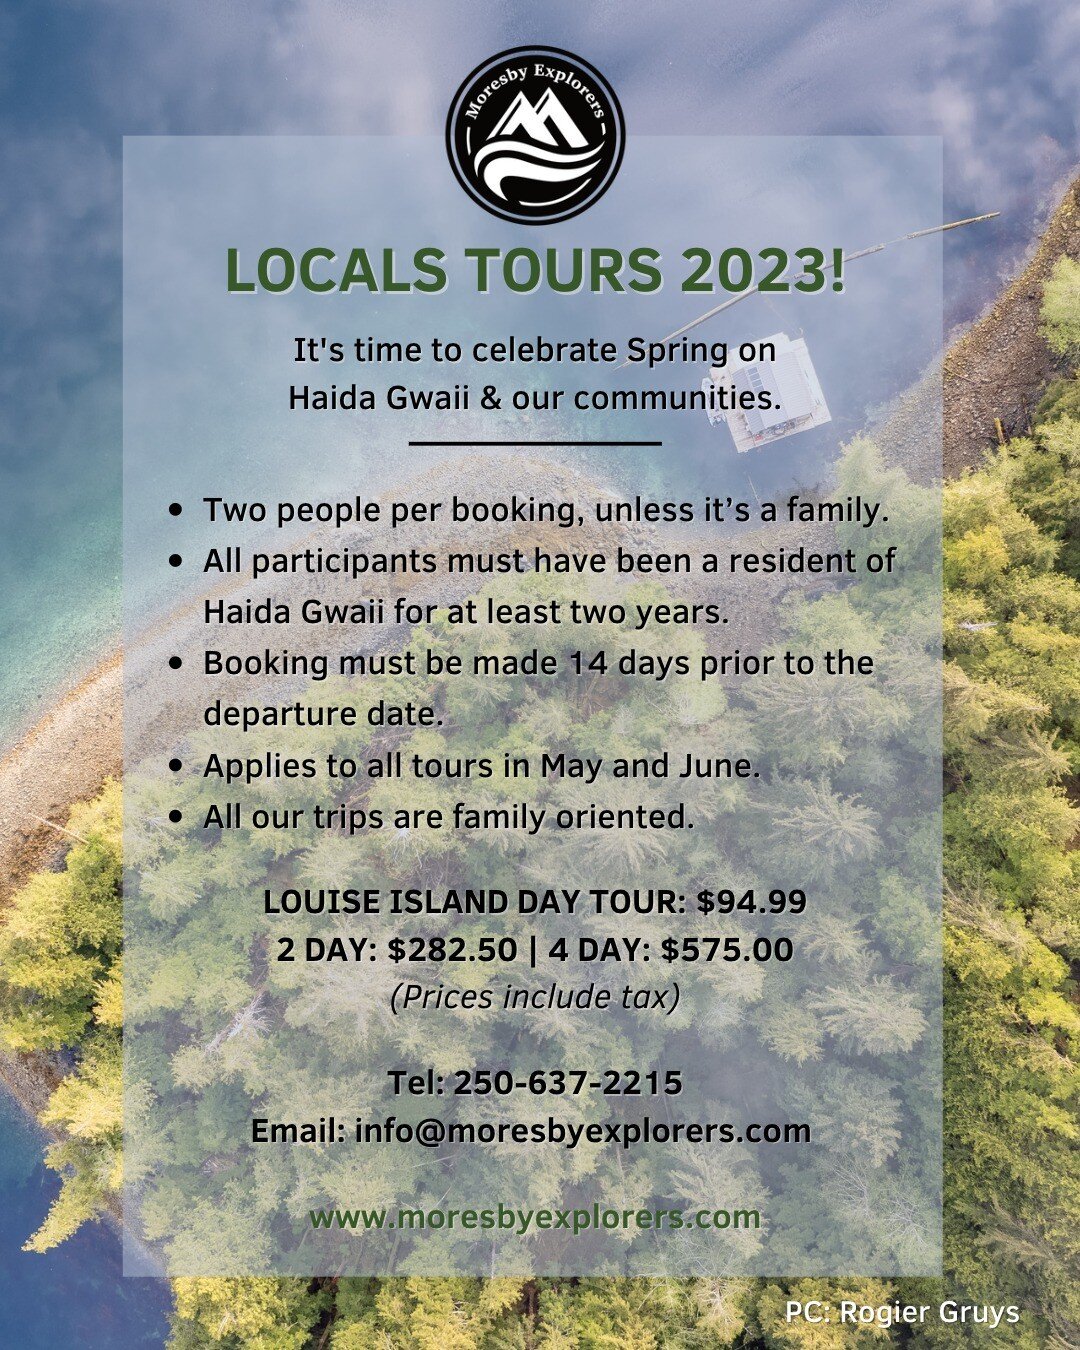 📣 Our Locals Tours are back! 📣

It's time to celebrate Spring on Haida Gwaii and our communities. 

The details:

- Two people per booking unless it&rsquo;s a family.
- All participants must have been a resident of Haida Gwaii for at least two year